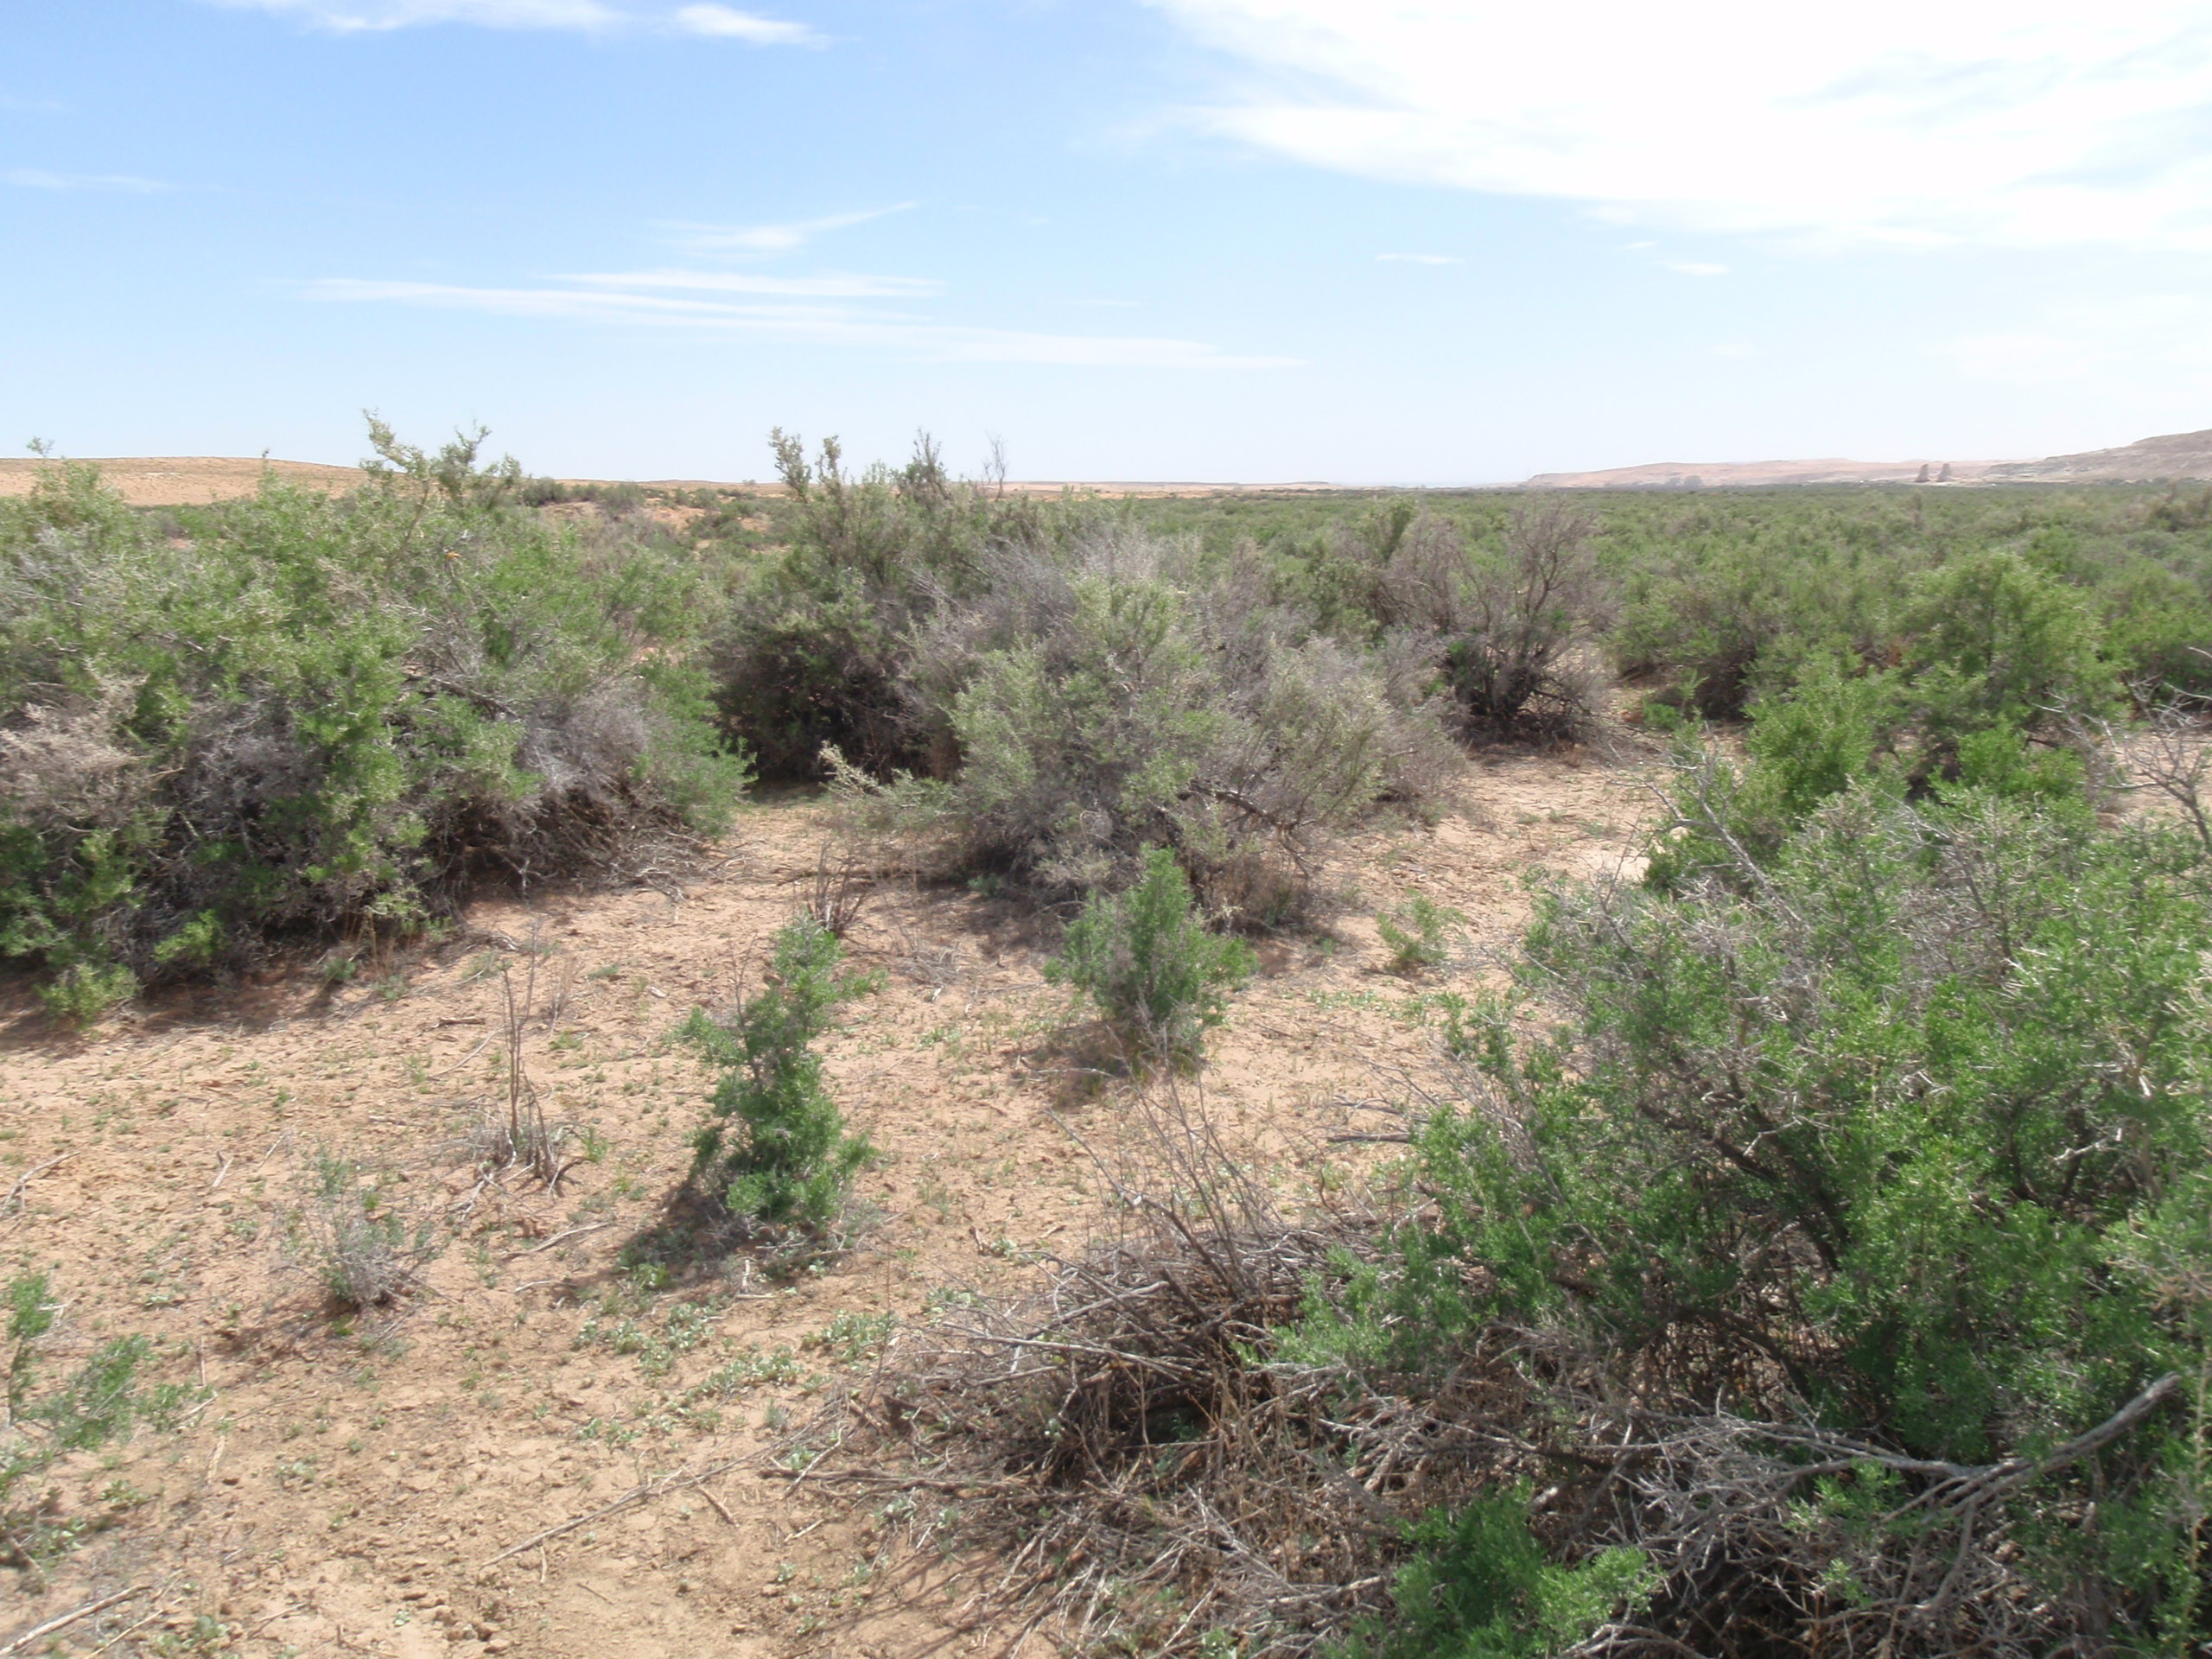 Brushland habitat and a clump of greasewood